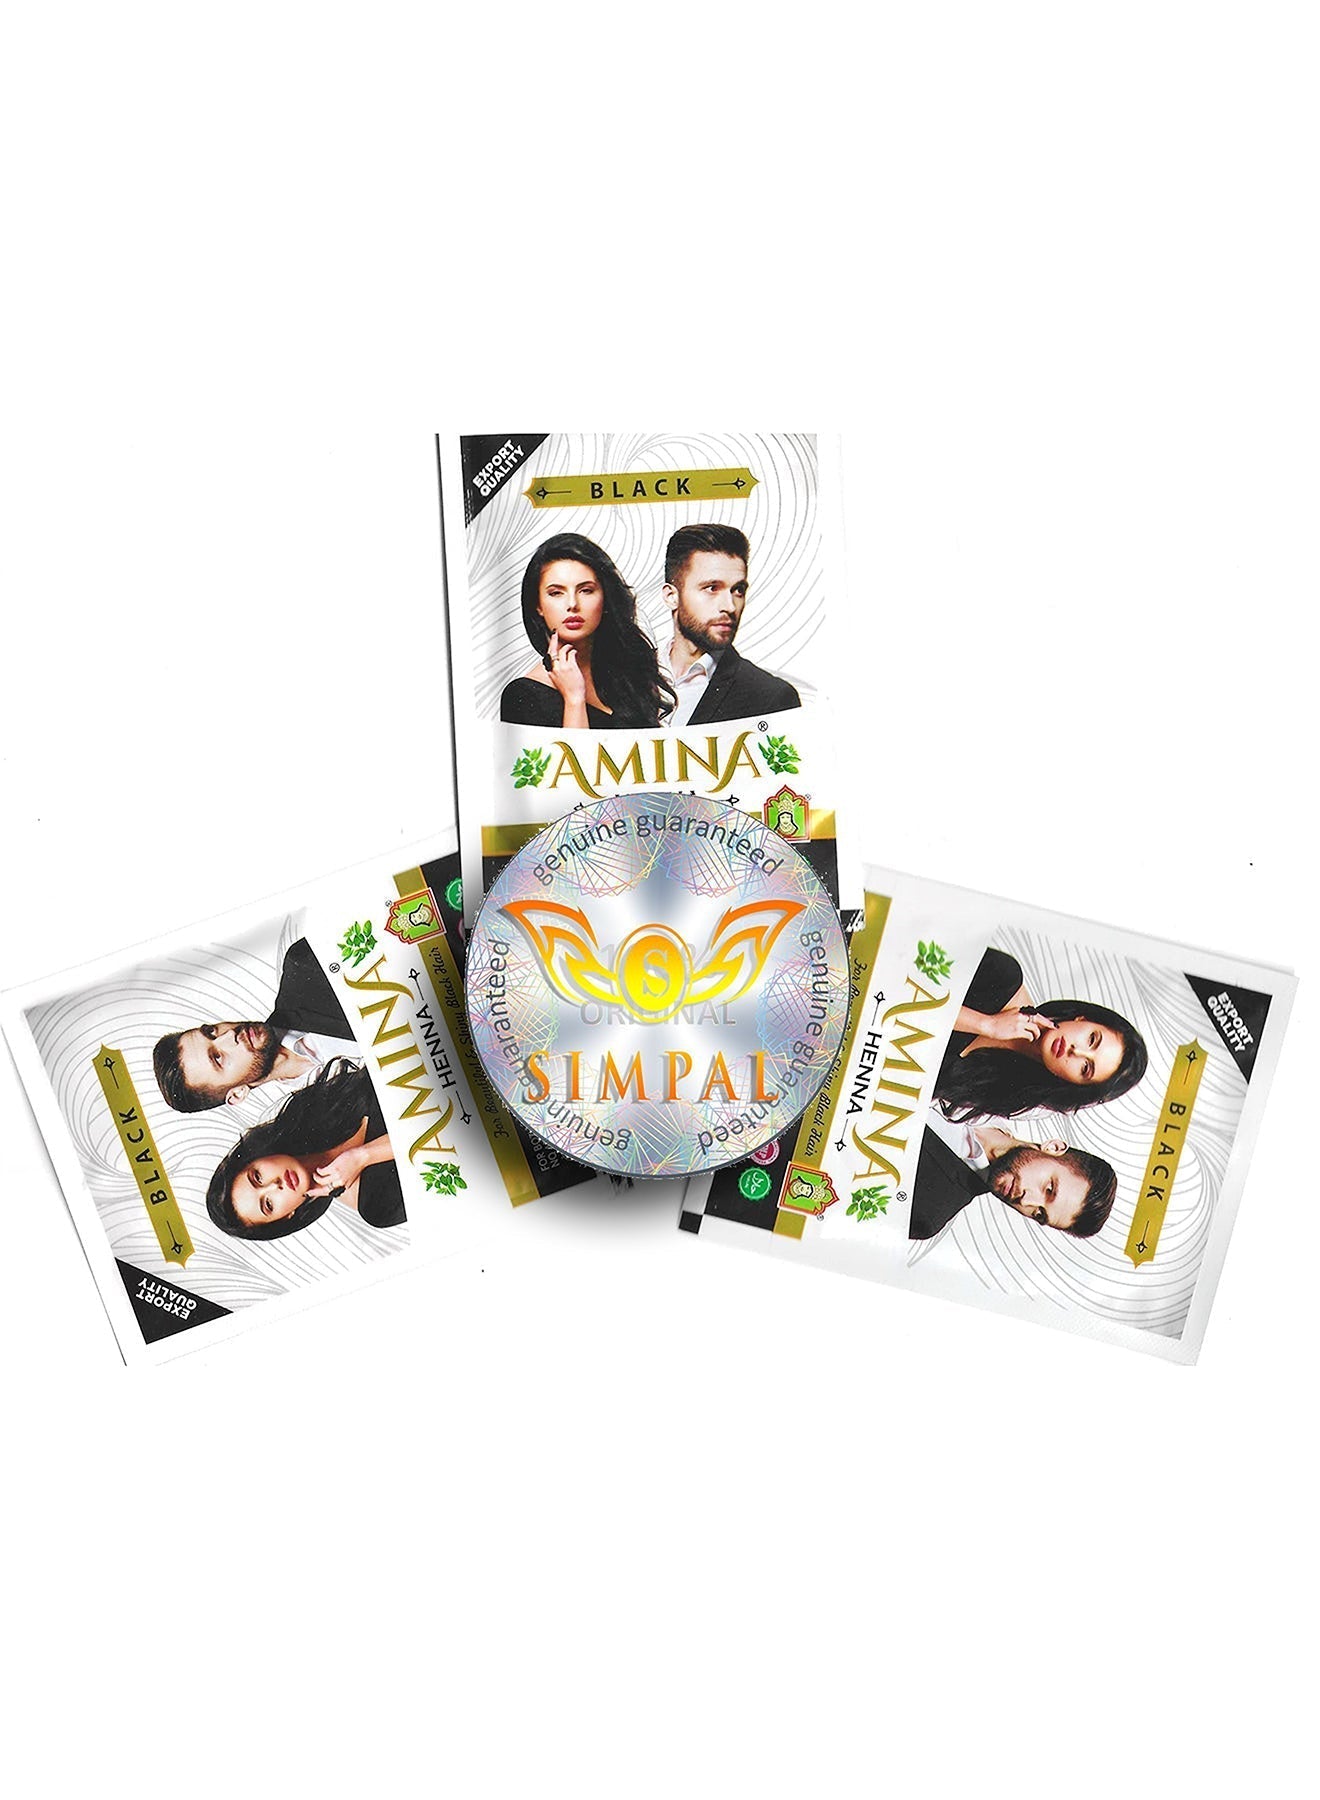 Amina Henna Natural Color Black 10g x 6 pouch Value Pack of 12 